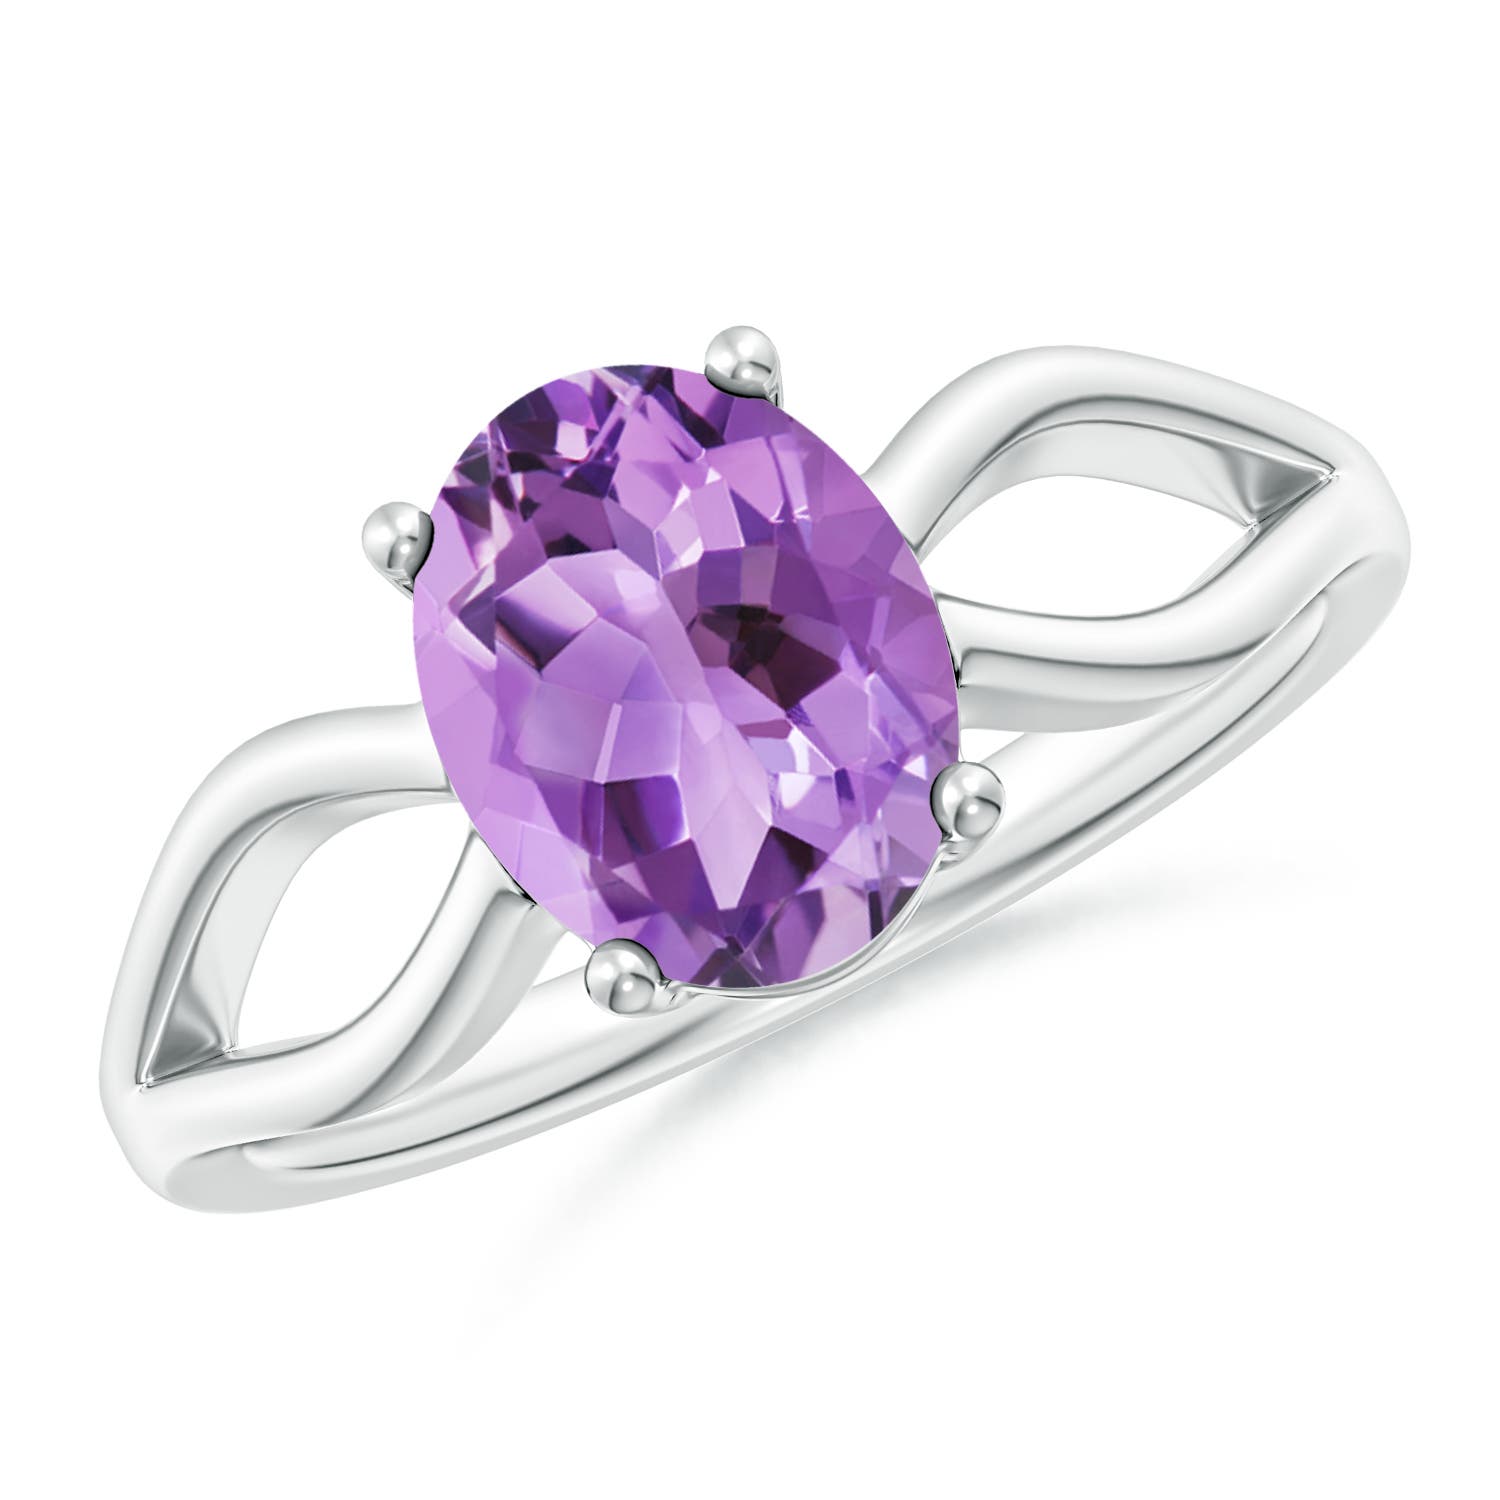 A - Amethyst / 1.6 CT / 14 KT White Gold